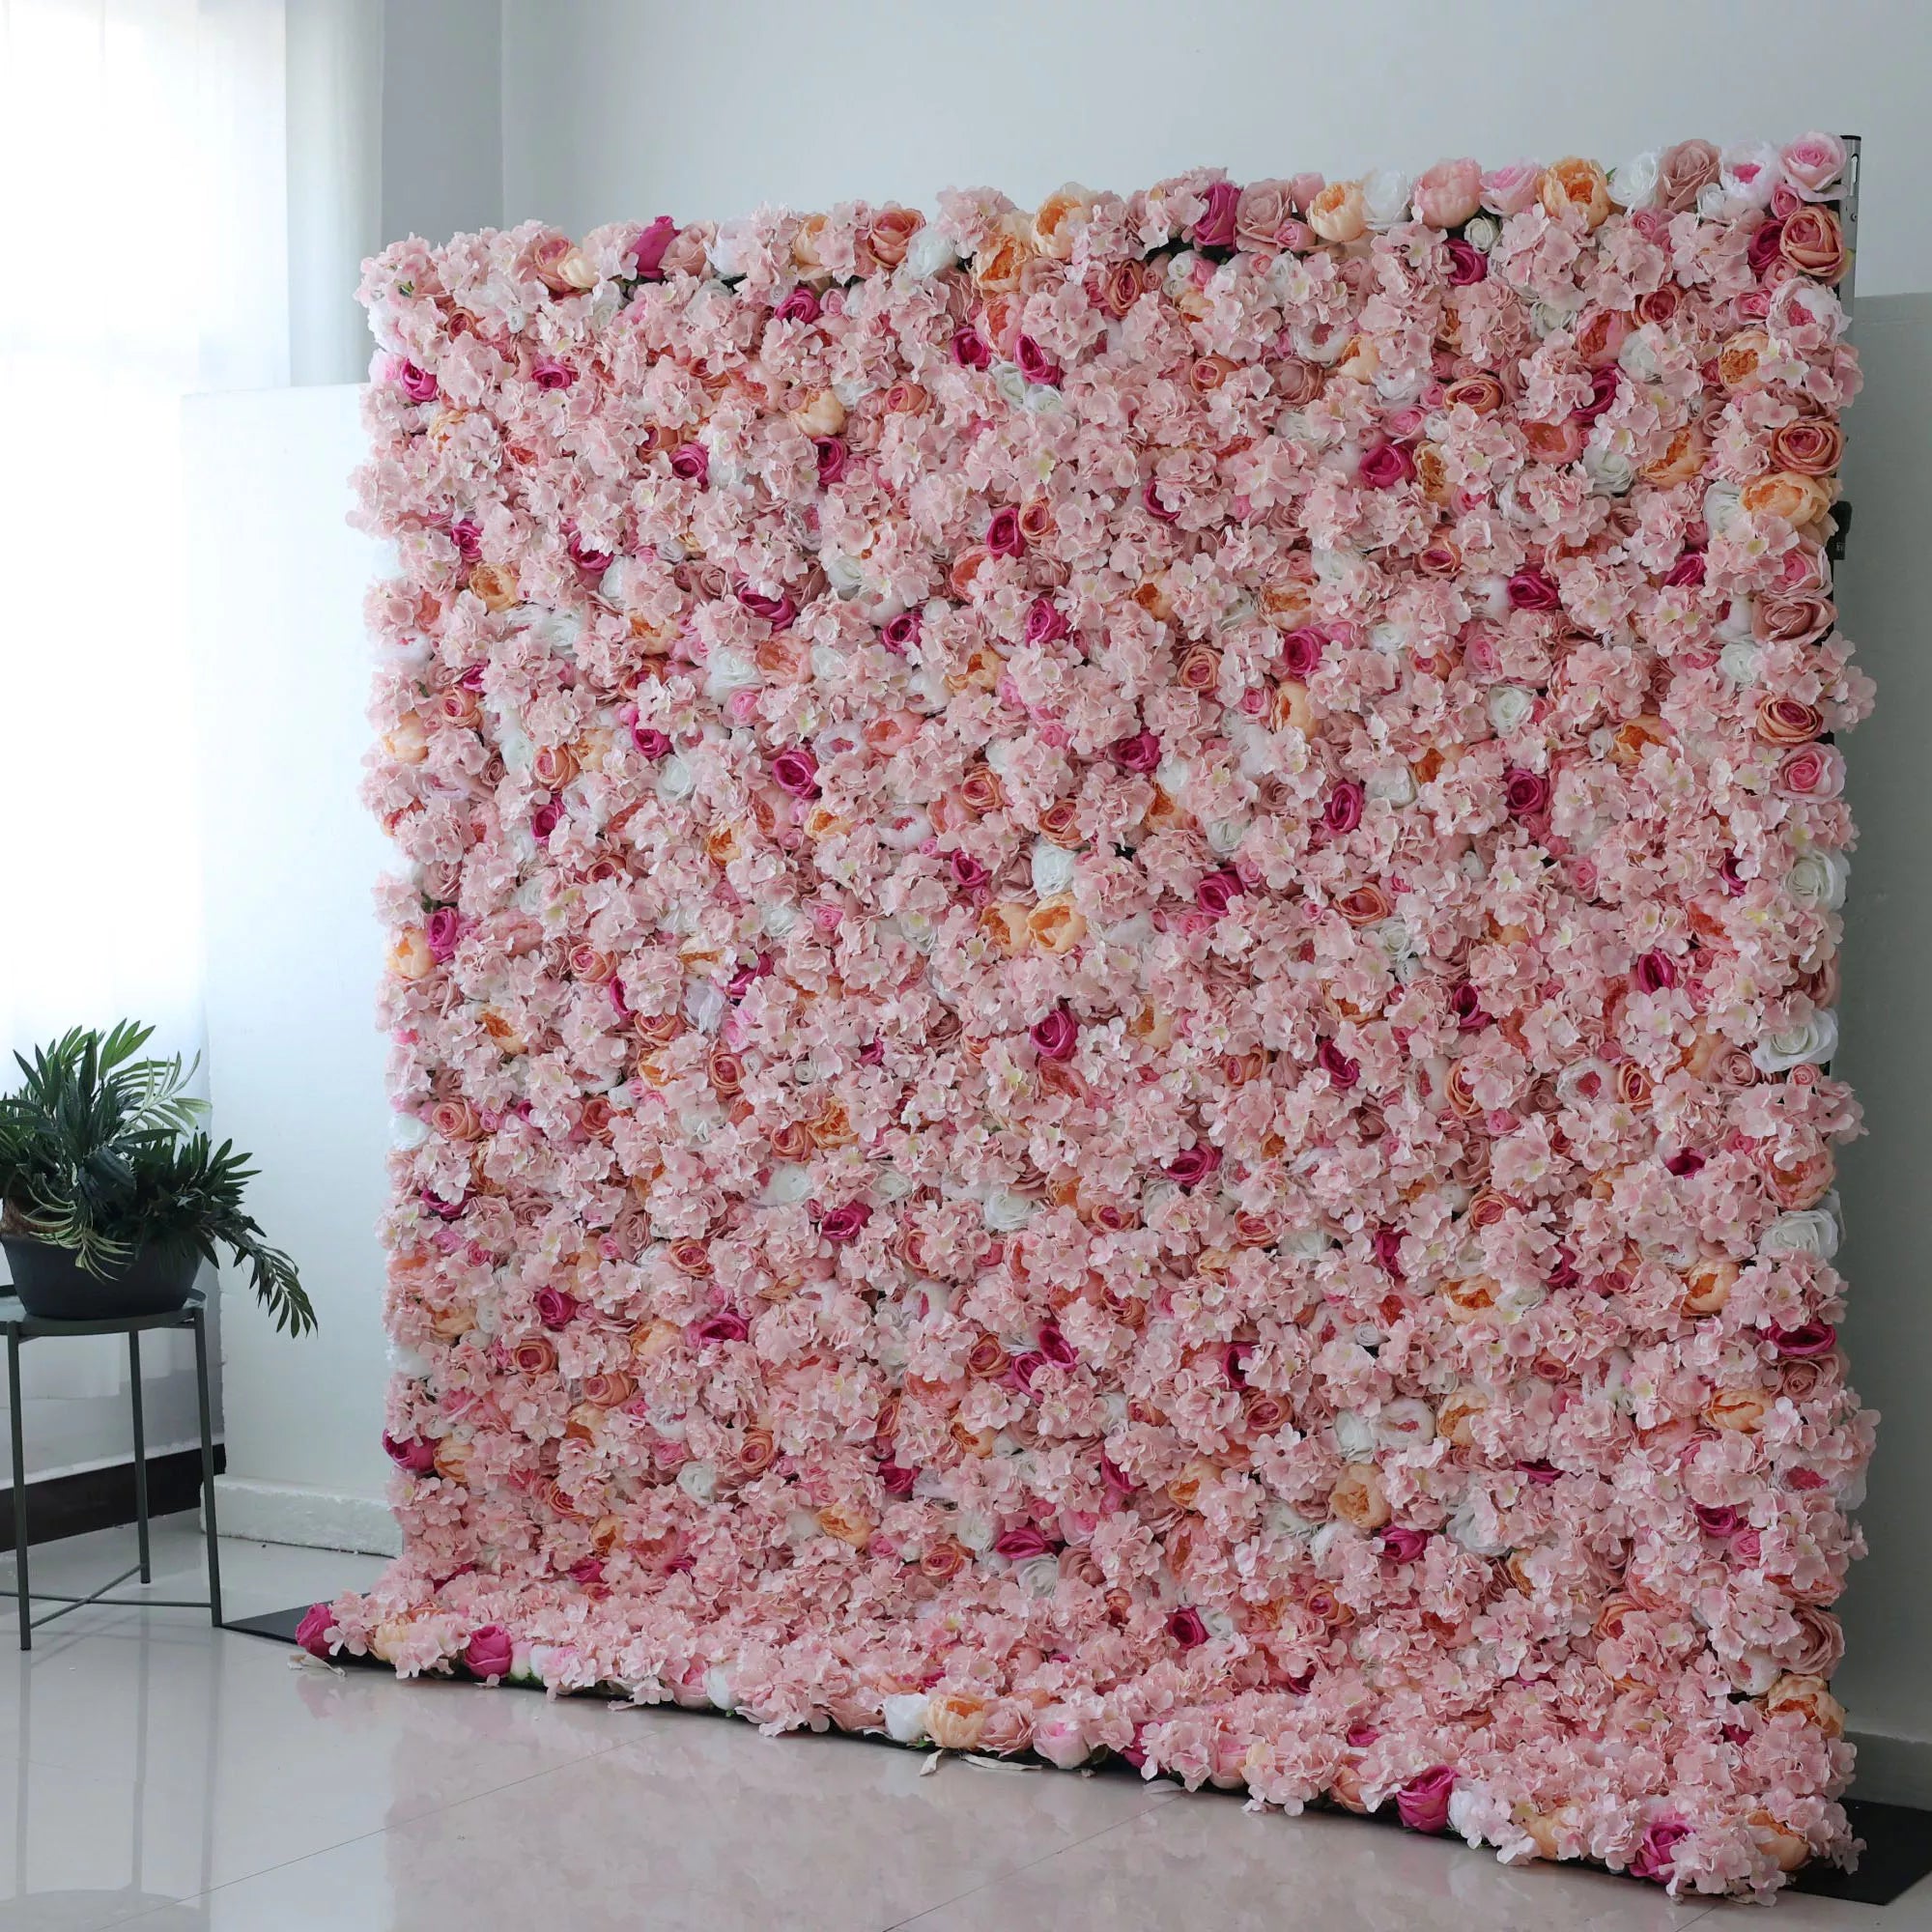 ValarFlowers Backdrop: Dive into Pink Paradise. A serene sea of blossoms, blending blush with rose. Elevate events with this exquisite ensemble of elegance and enchantment.